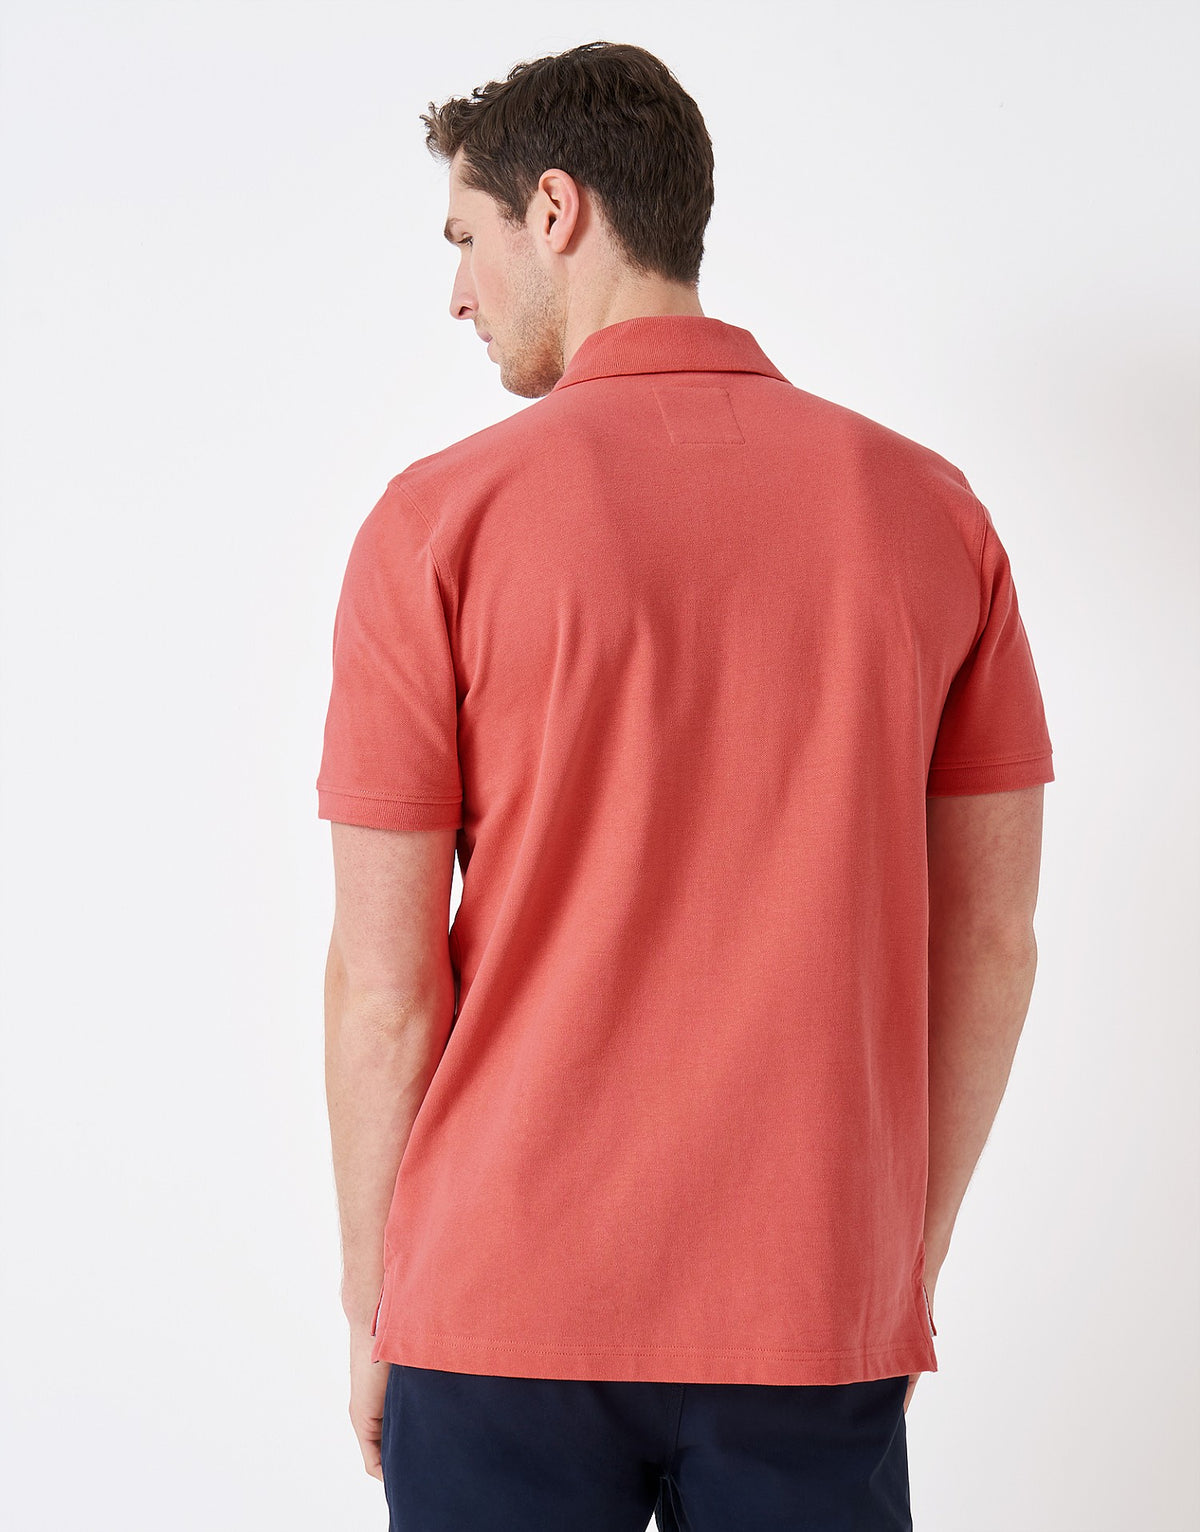 Crew Clothing Mens Pique Polo Shirt 'Classic Pique Polo' - Short Sleeved, 03, Mke002, Spiced Coral